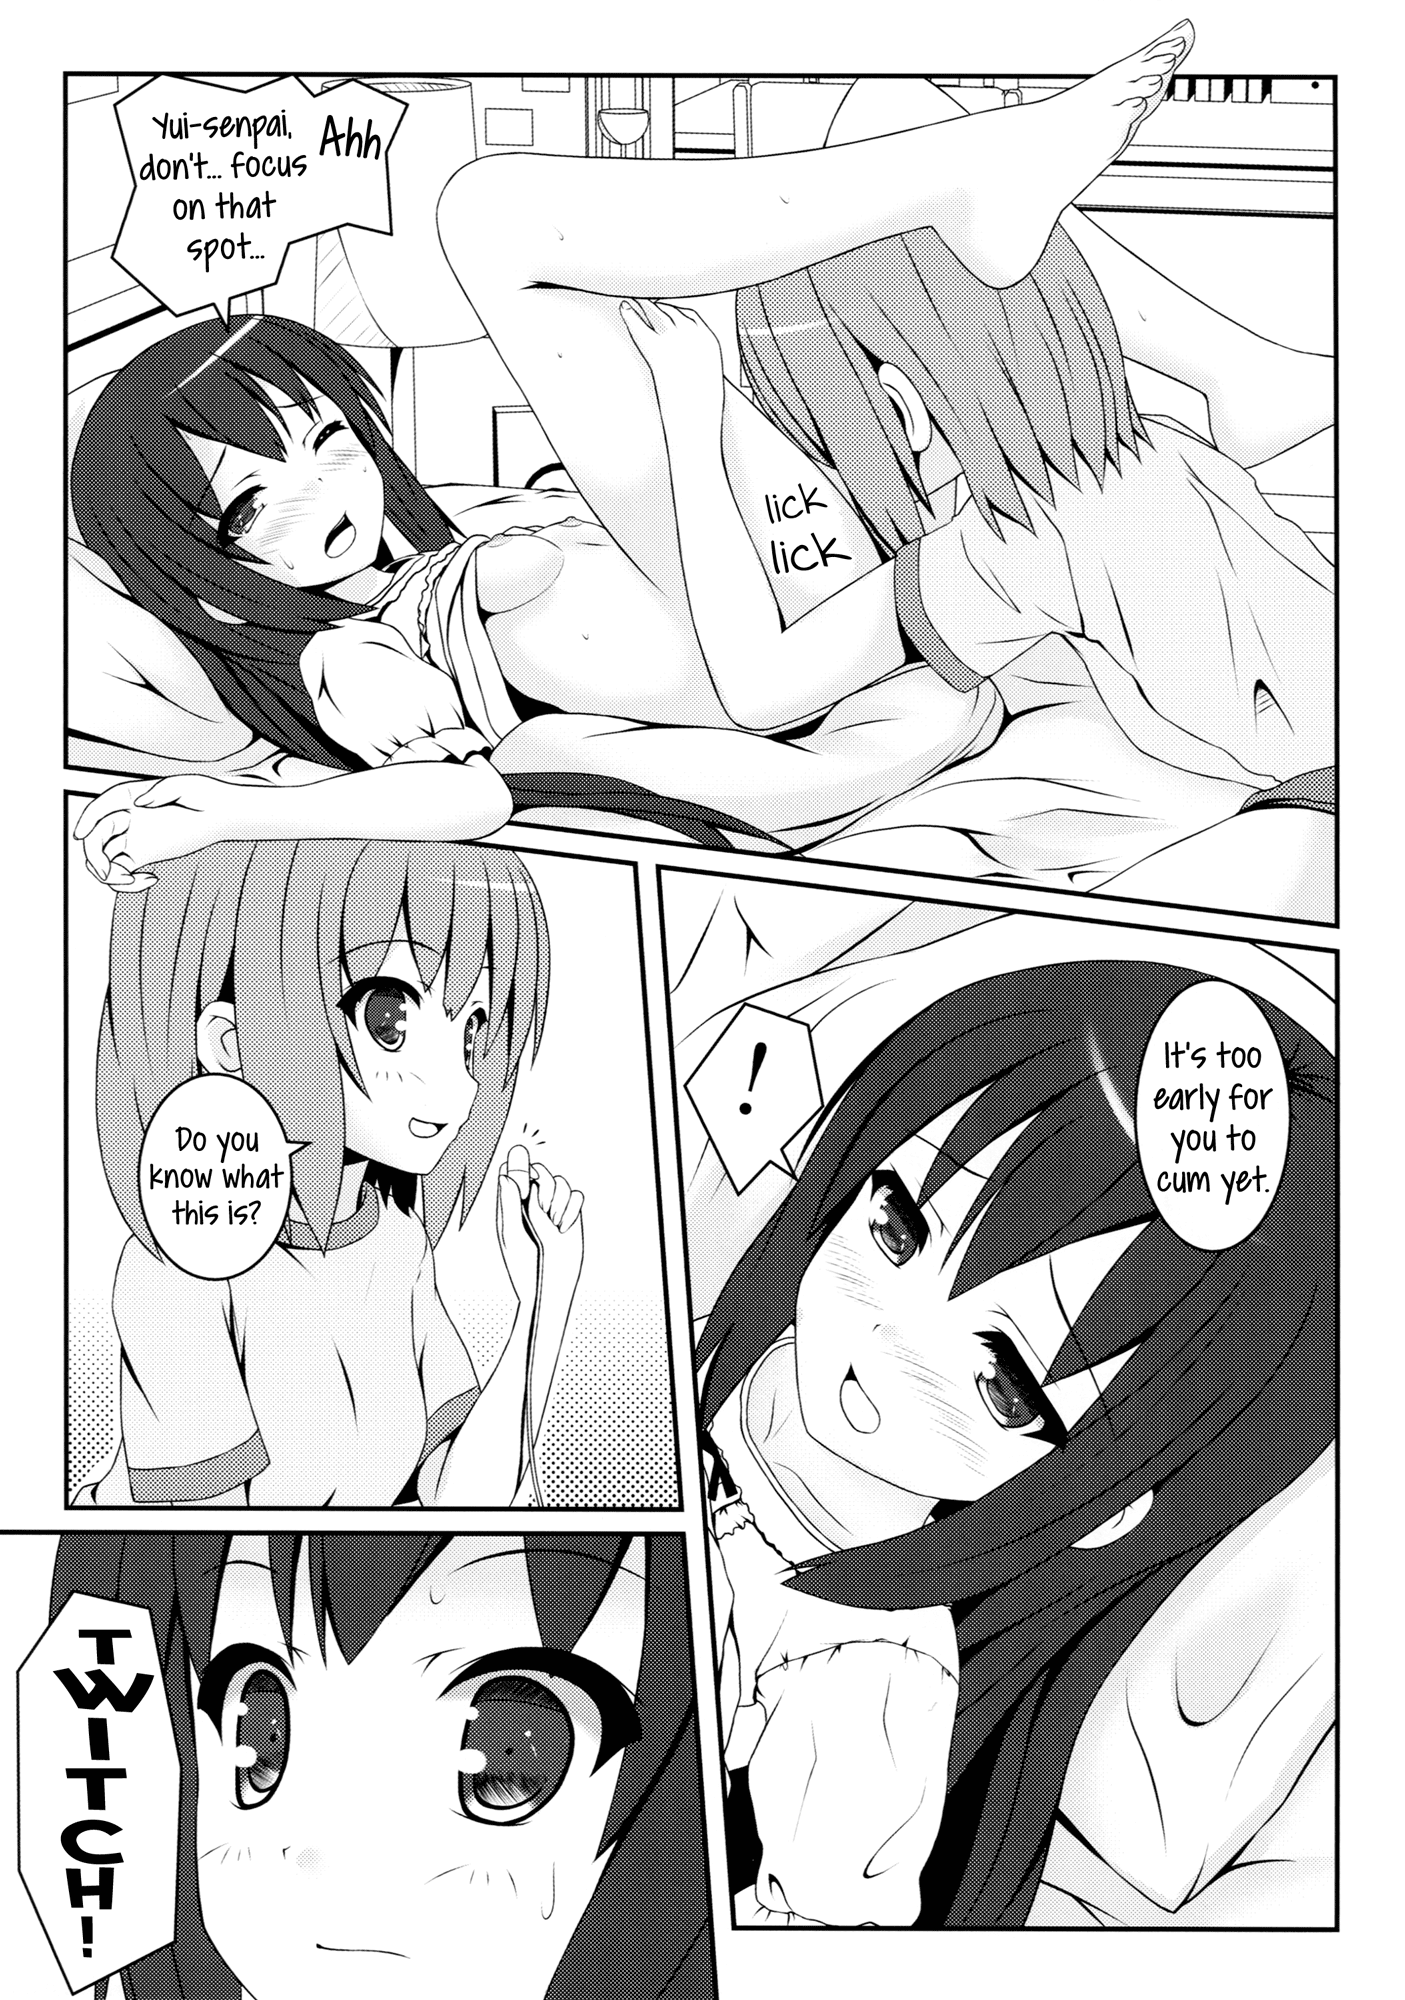 Magic for Nighttime Only hentai manga picture 8